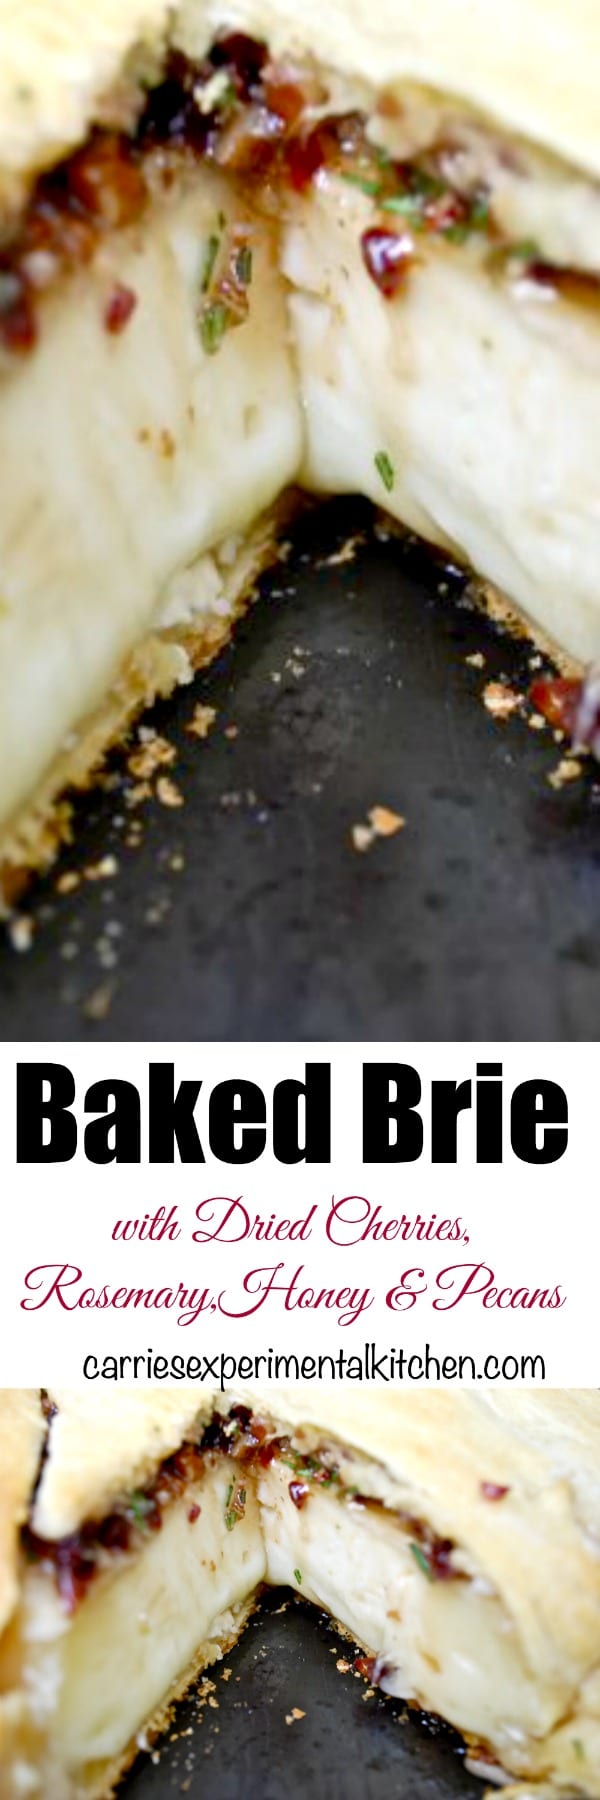 Baked Brie with Dried Cherries | Carrie’s Experimental Kitchen